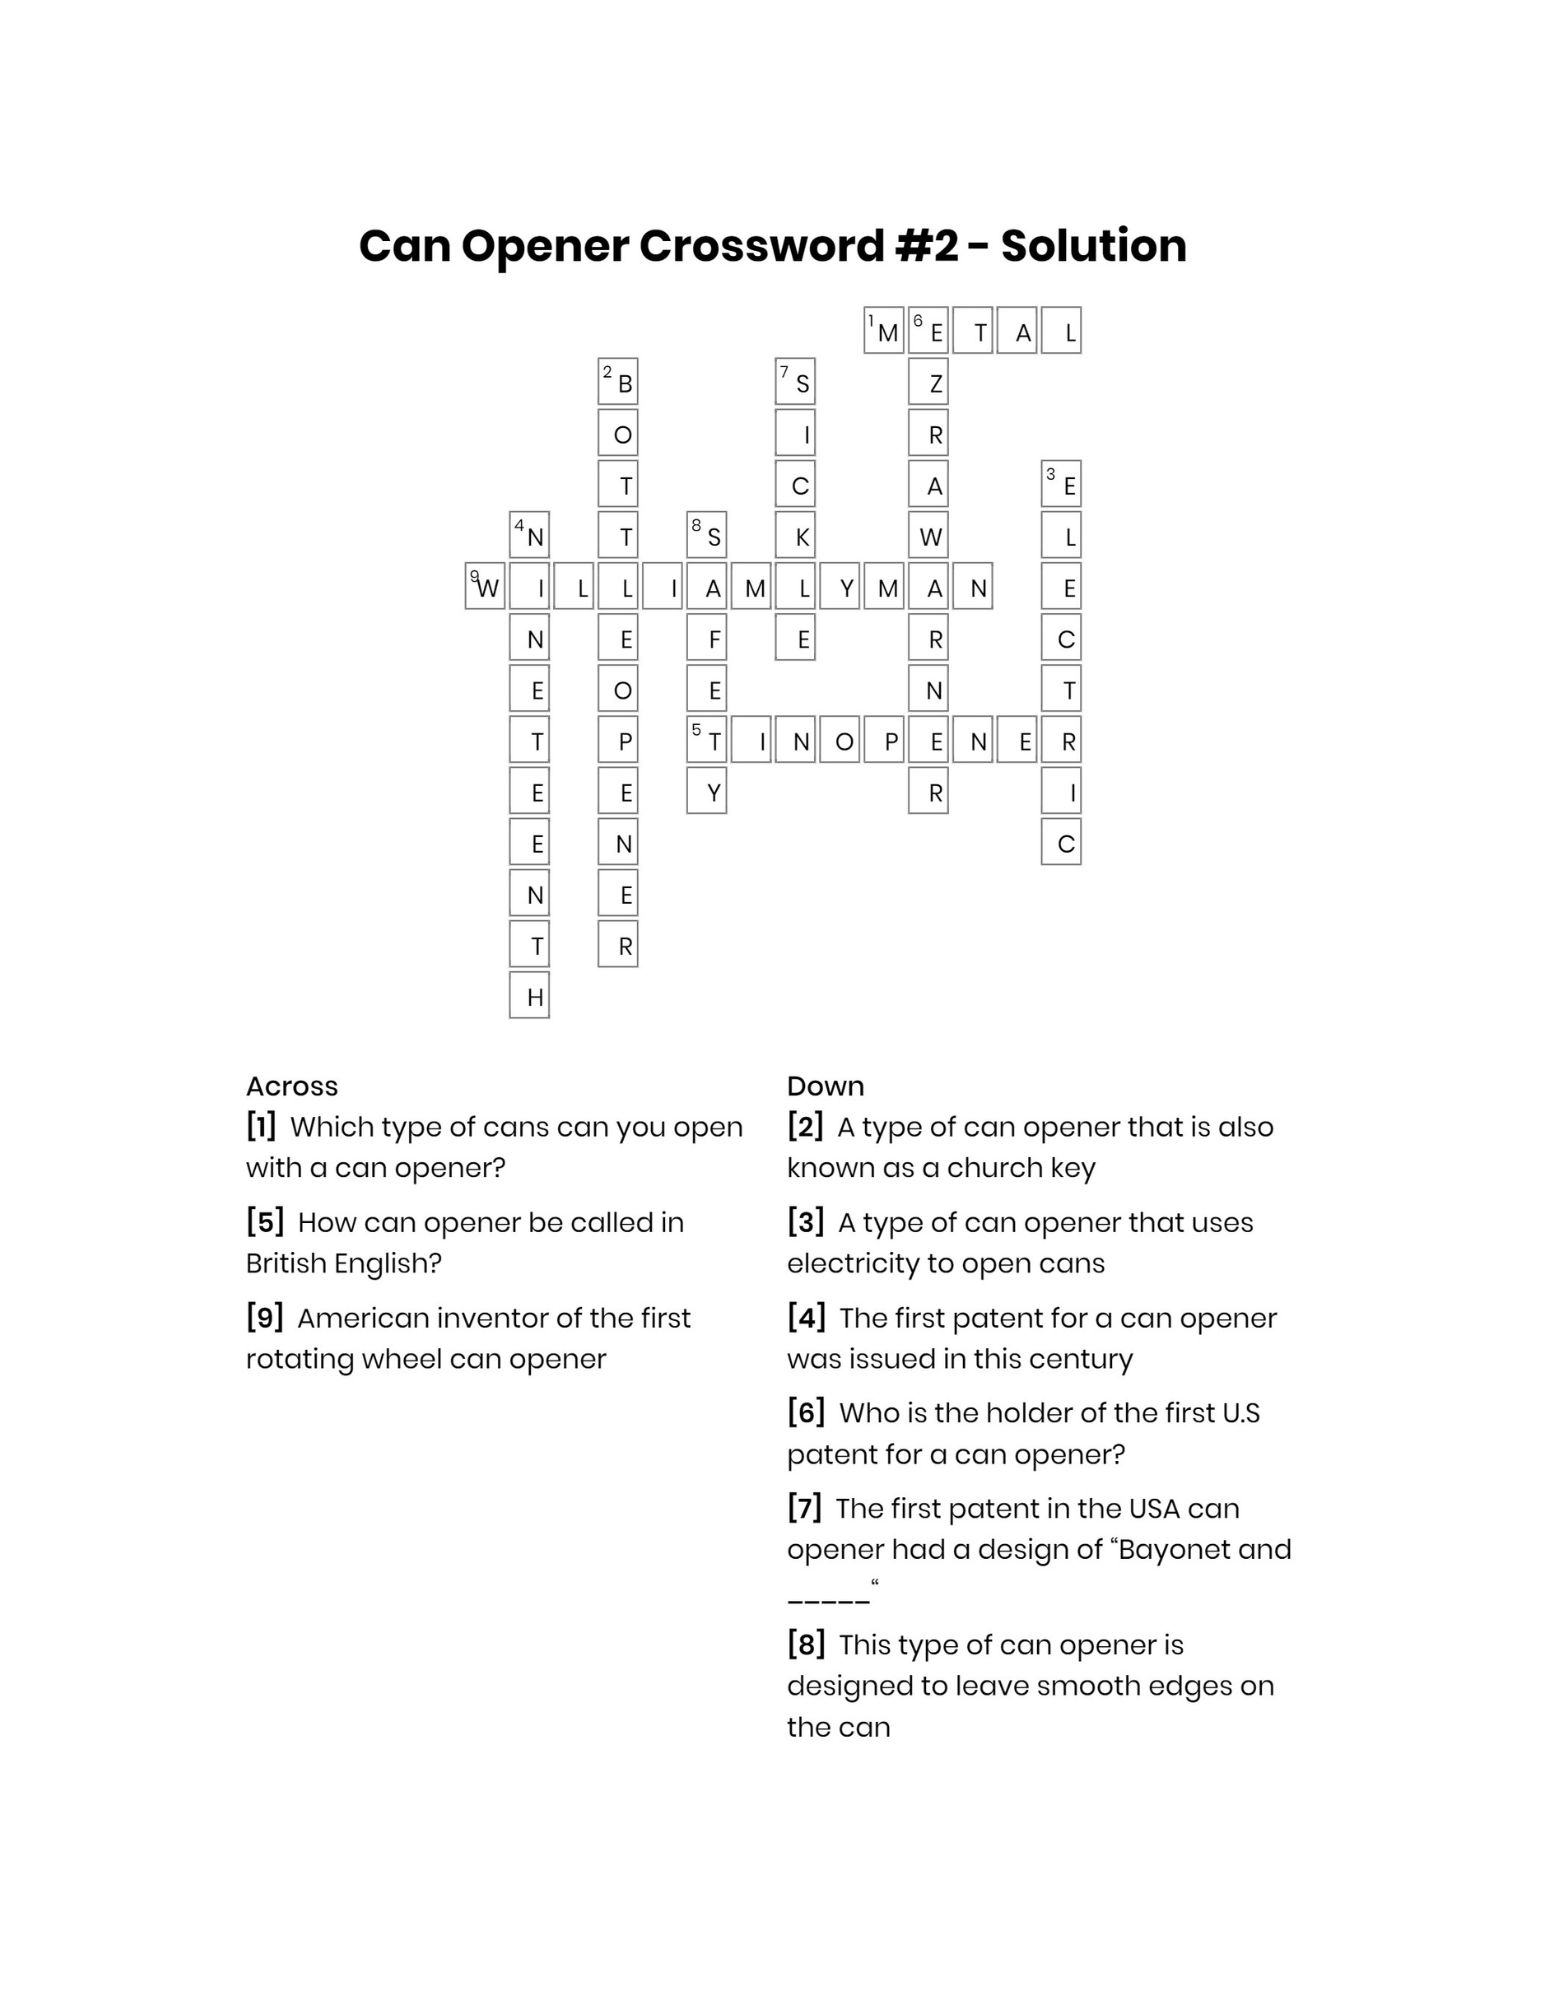 can opener crossword puzzle solutions<br />
